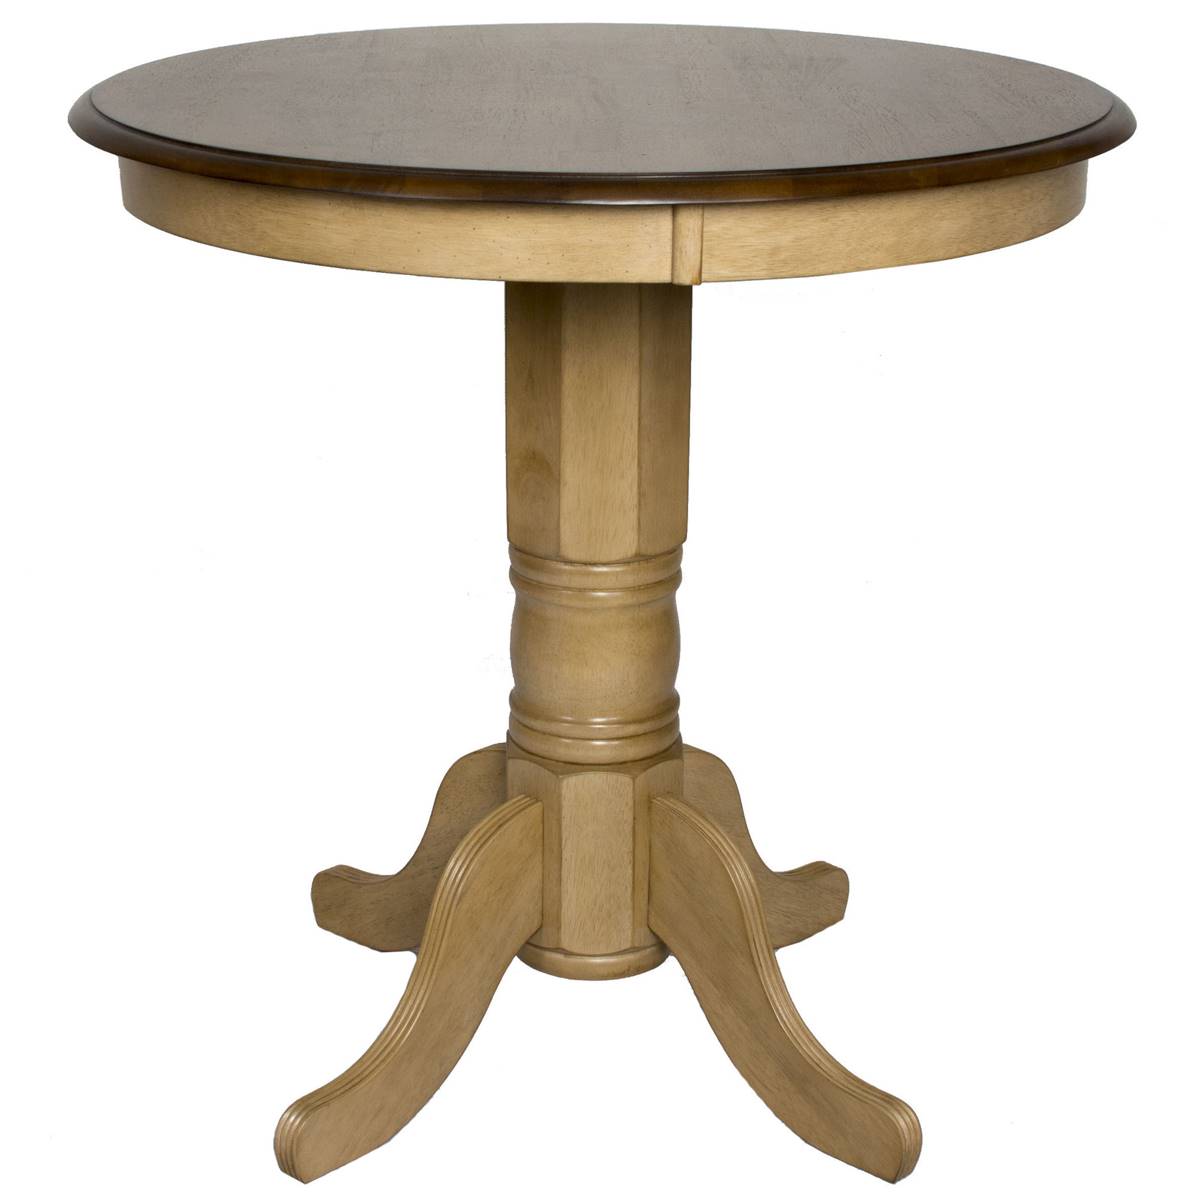 Besthom Brook Distressed Two-Tone Round Dining Room Table